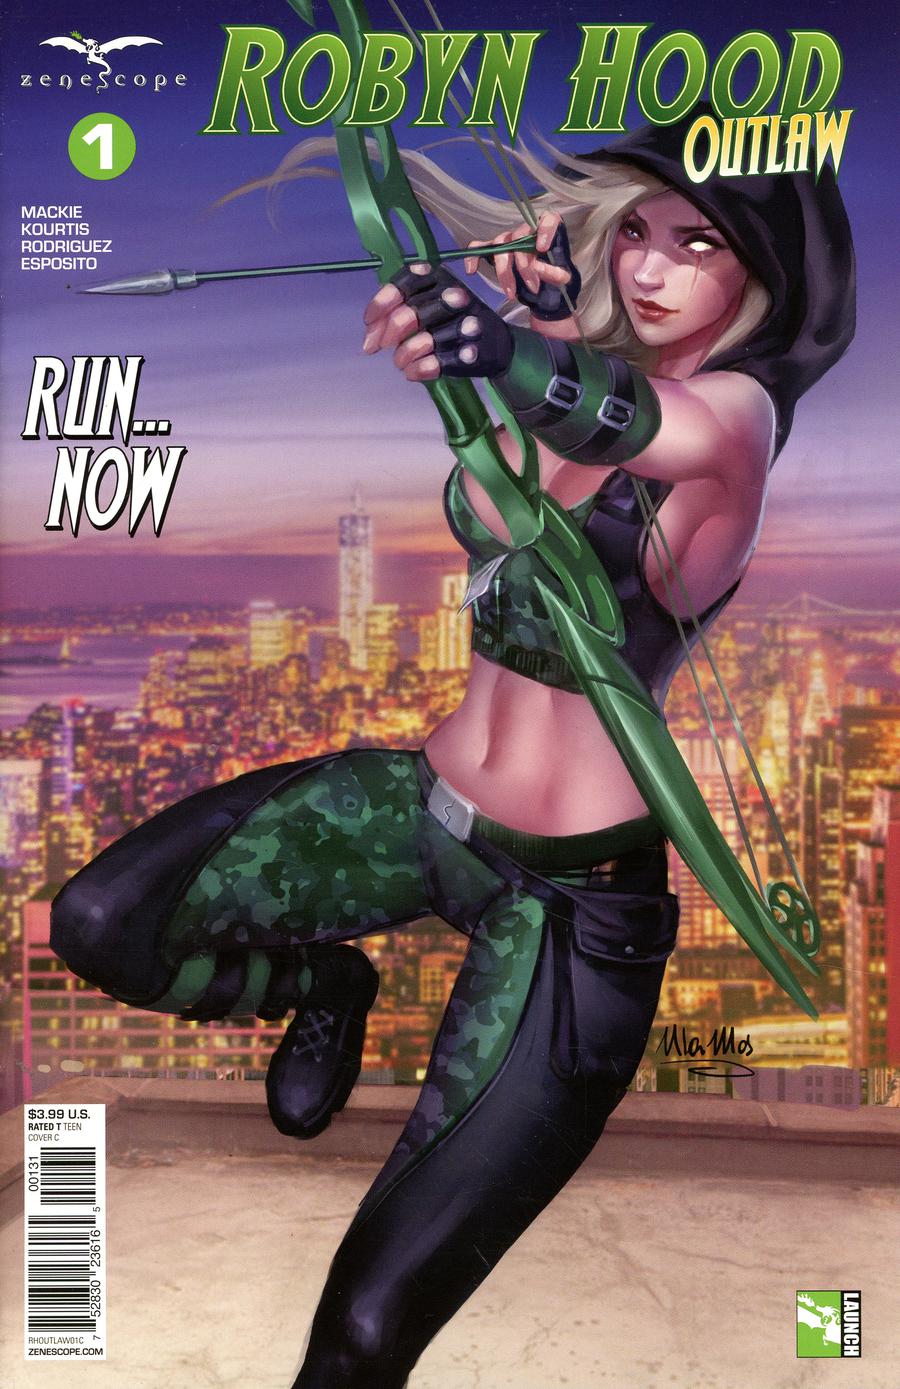 Grimm Fairy Tales Presents Robyn Hood Outlaw #1 Cover C Ula Mos